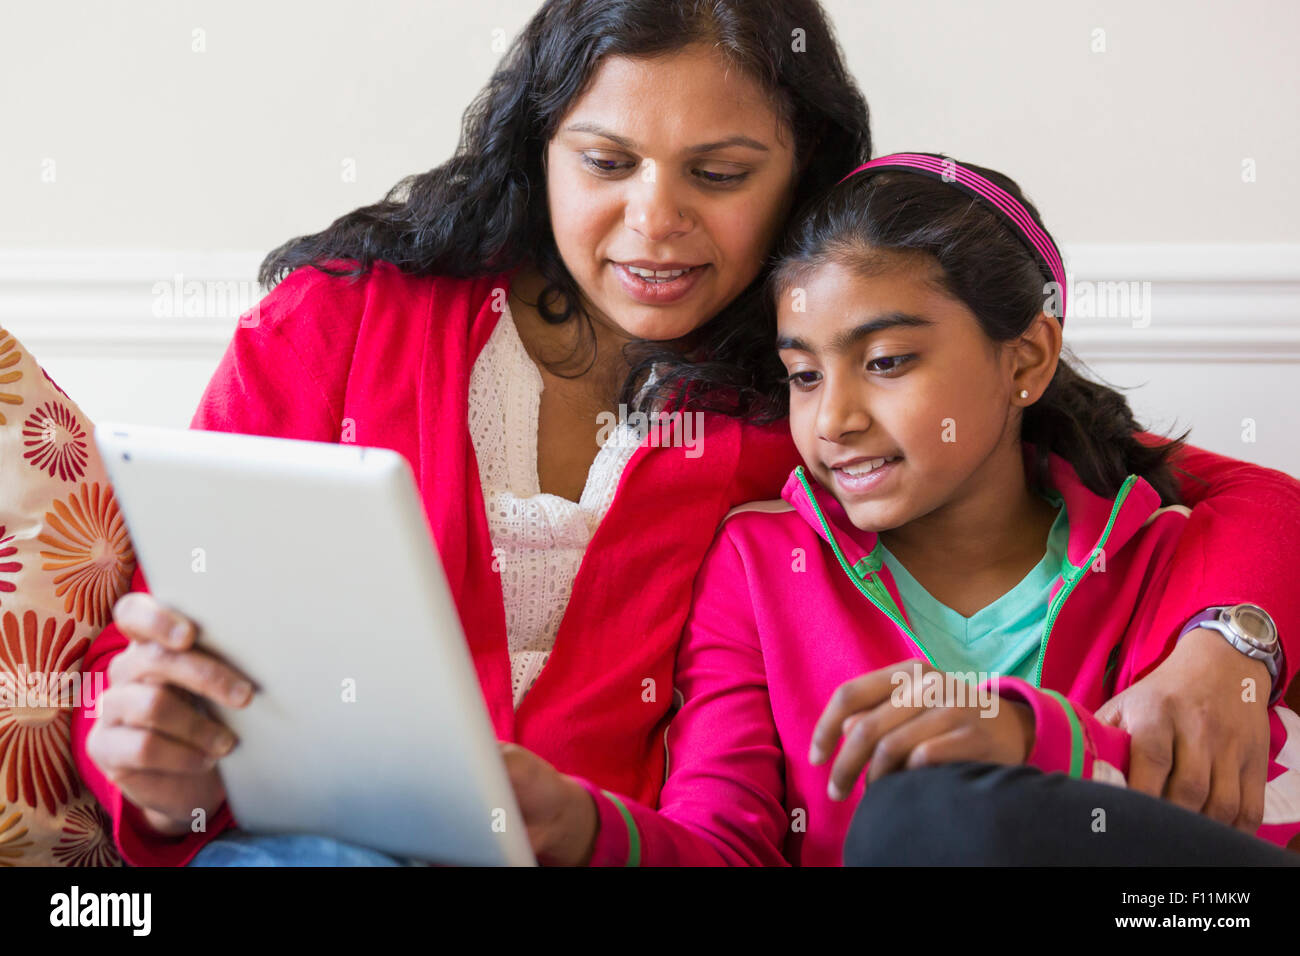 Indian mother and daughter using digital tablet Stock Photo